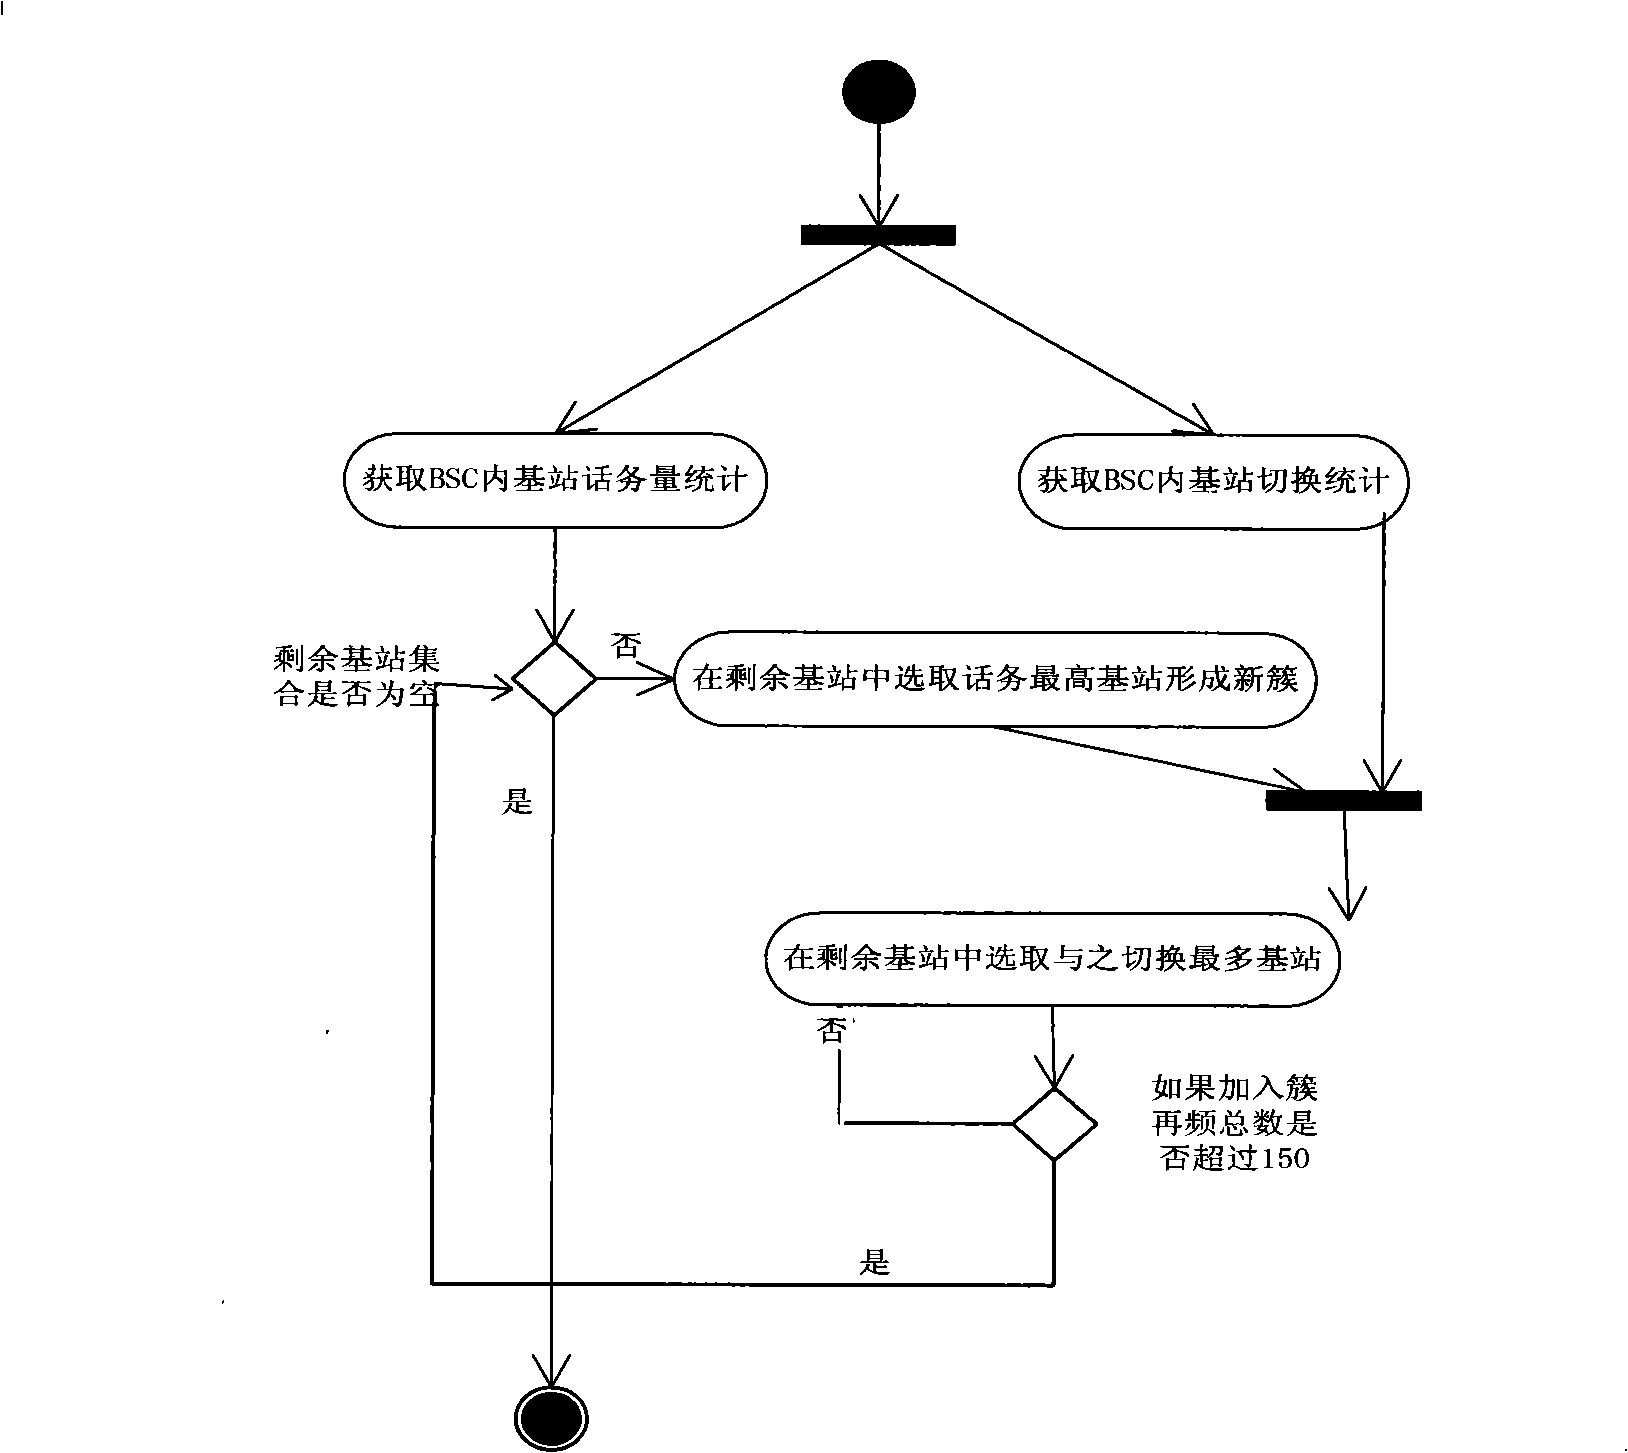 Method and system for network optimization and regulation through community cluster in communication network